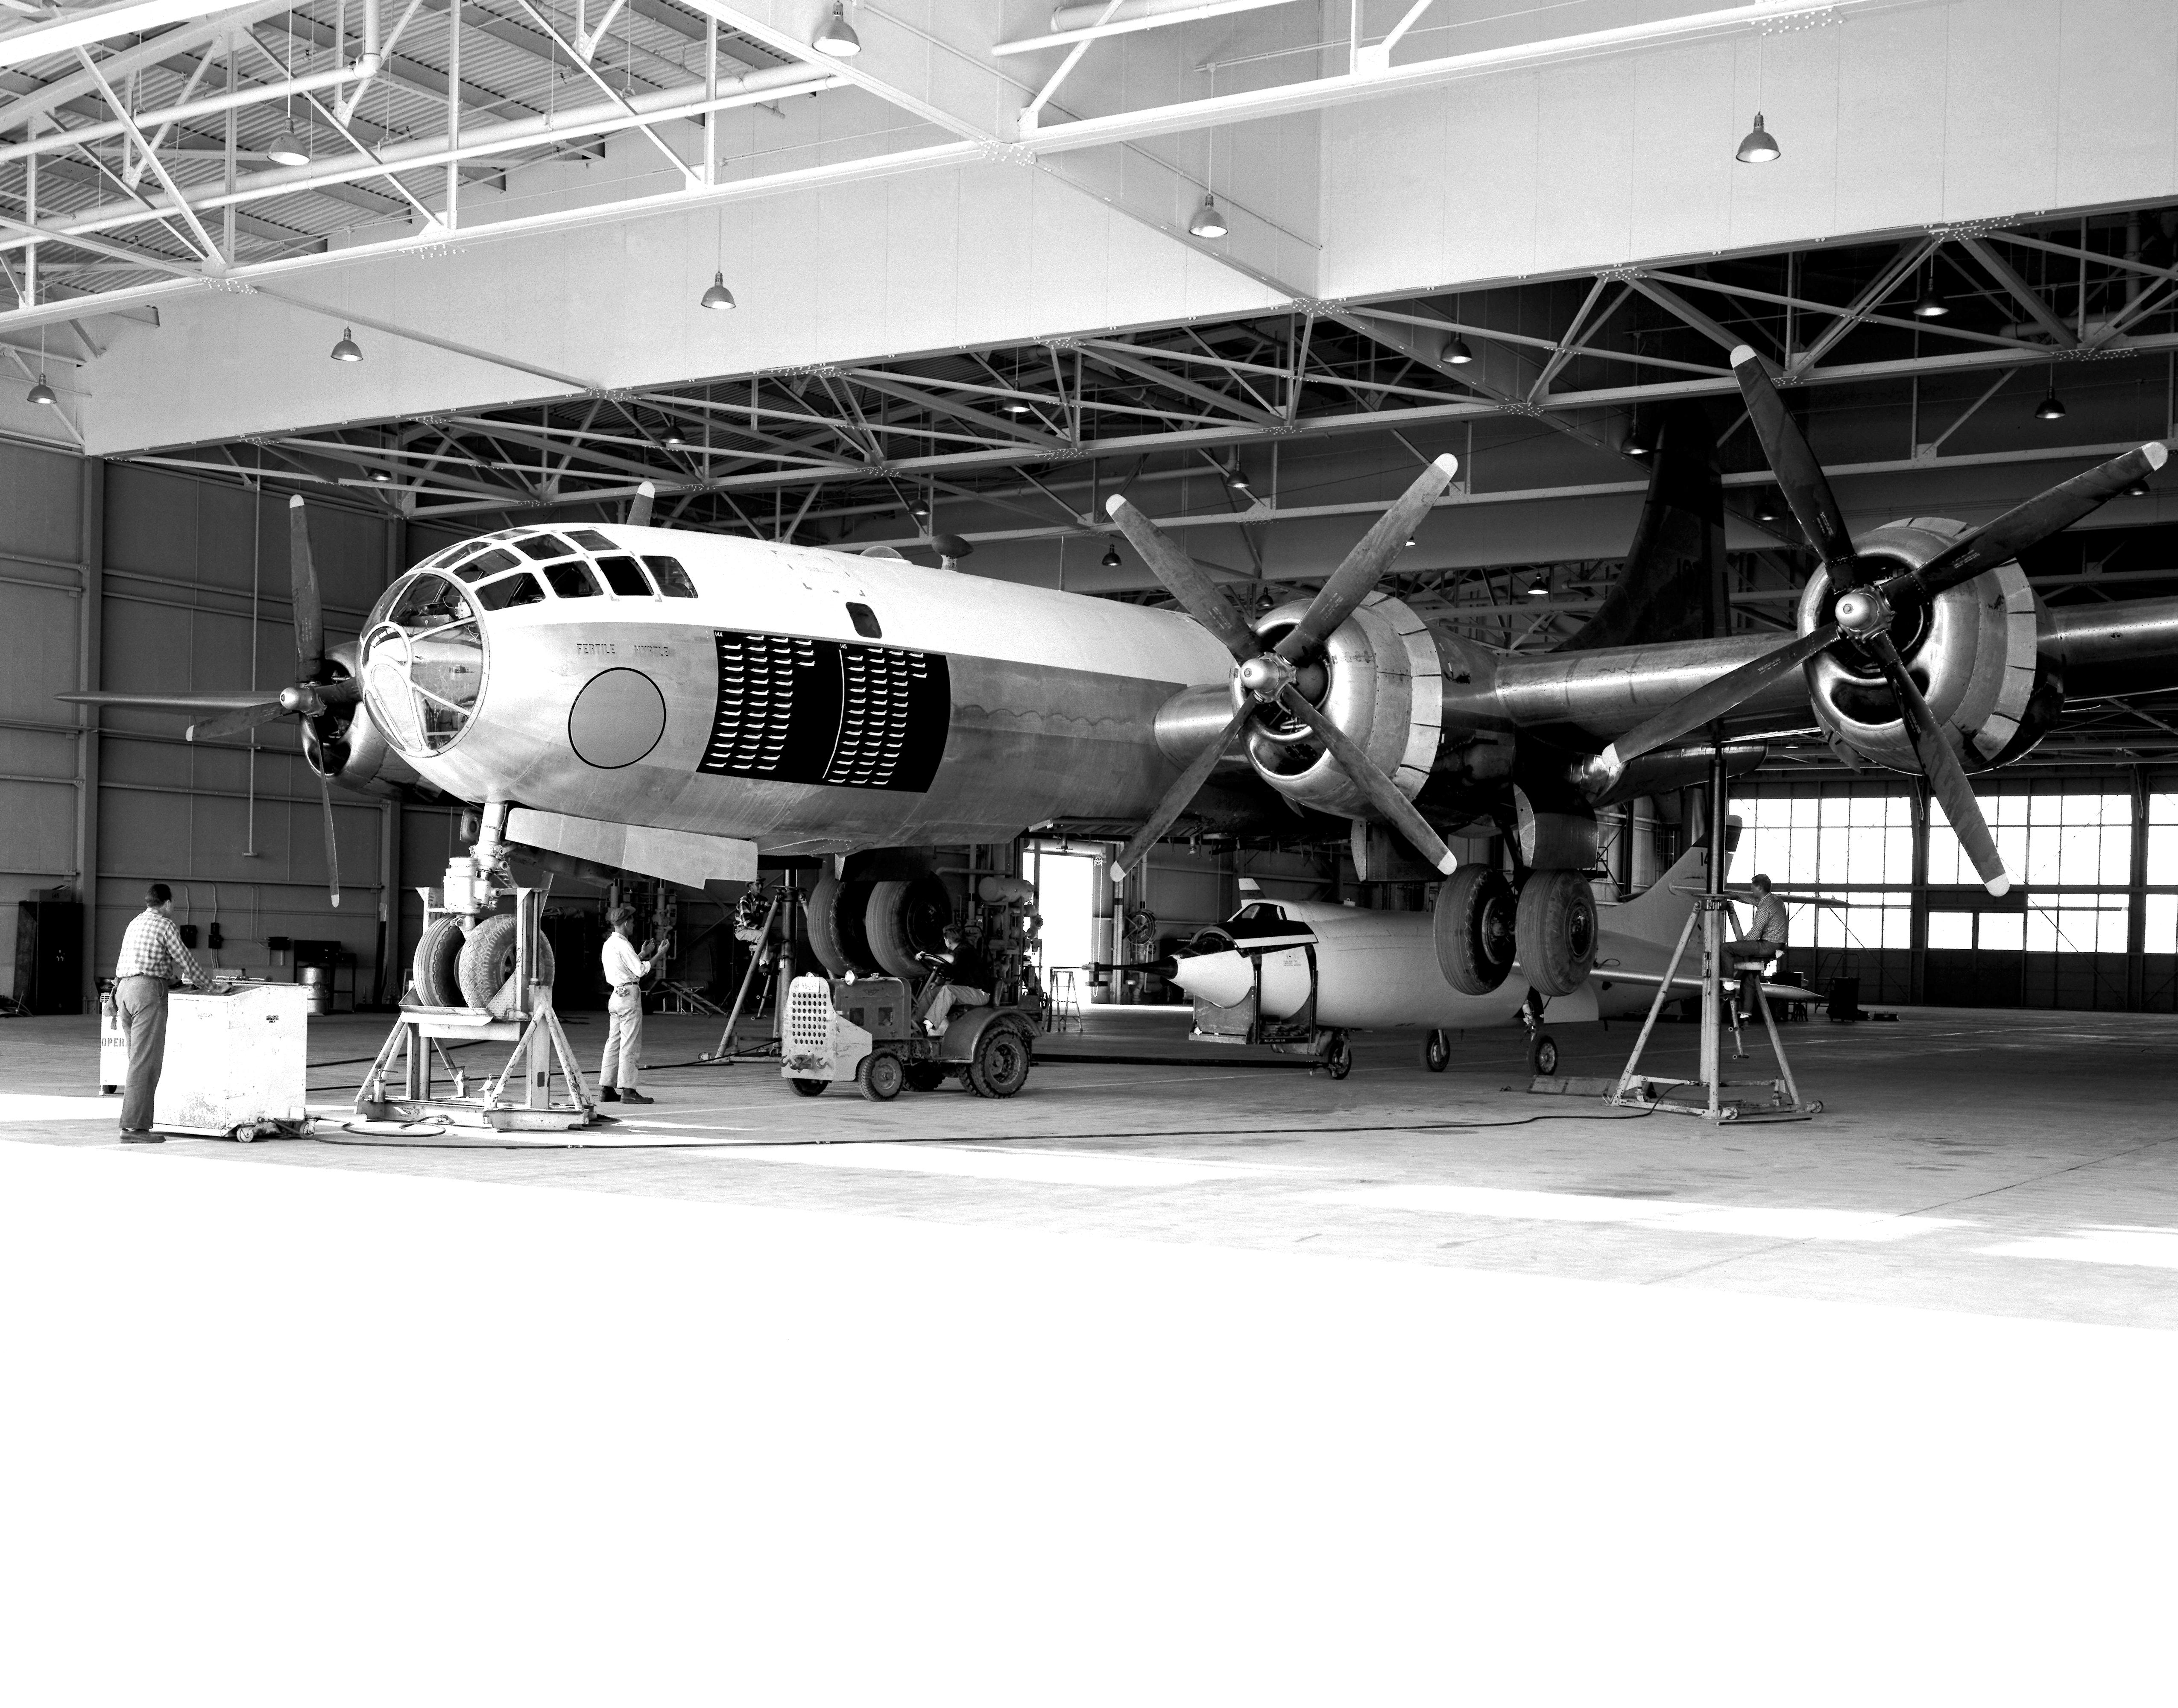 The P2B1-S is jacked up inside a hangar at Edwards AFB so the the Douglas D-558-II Skyrocket can be loaded aboard.